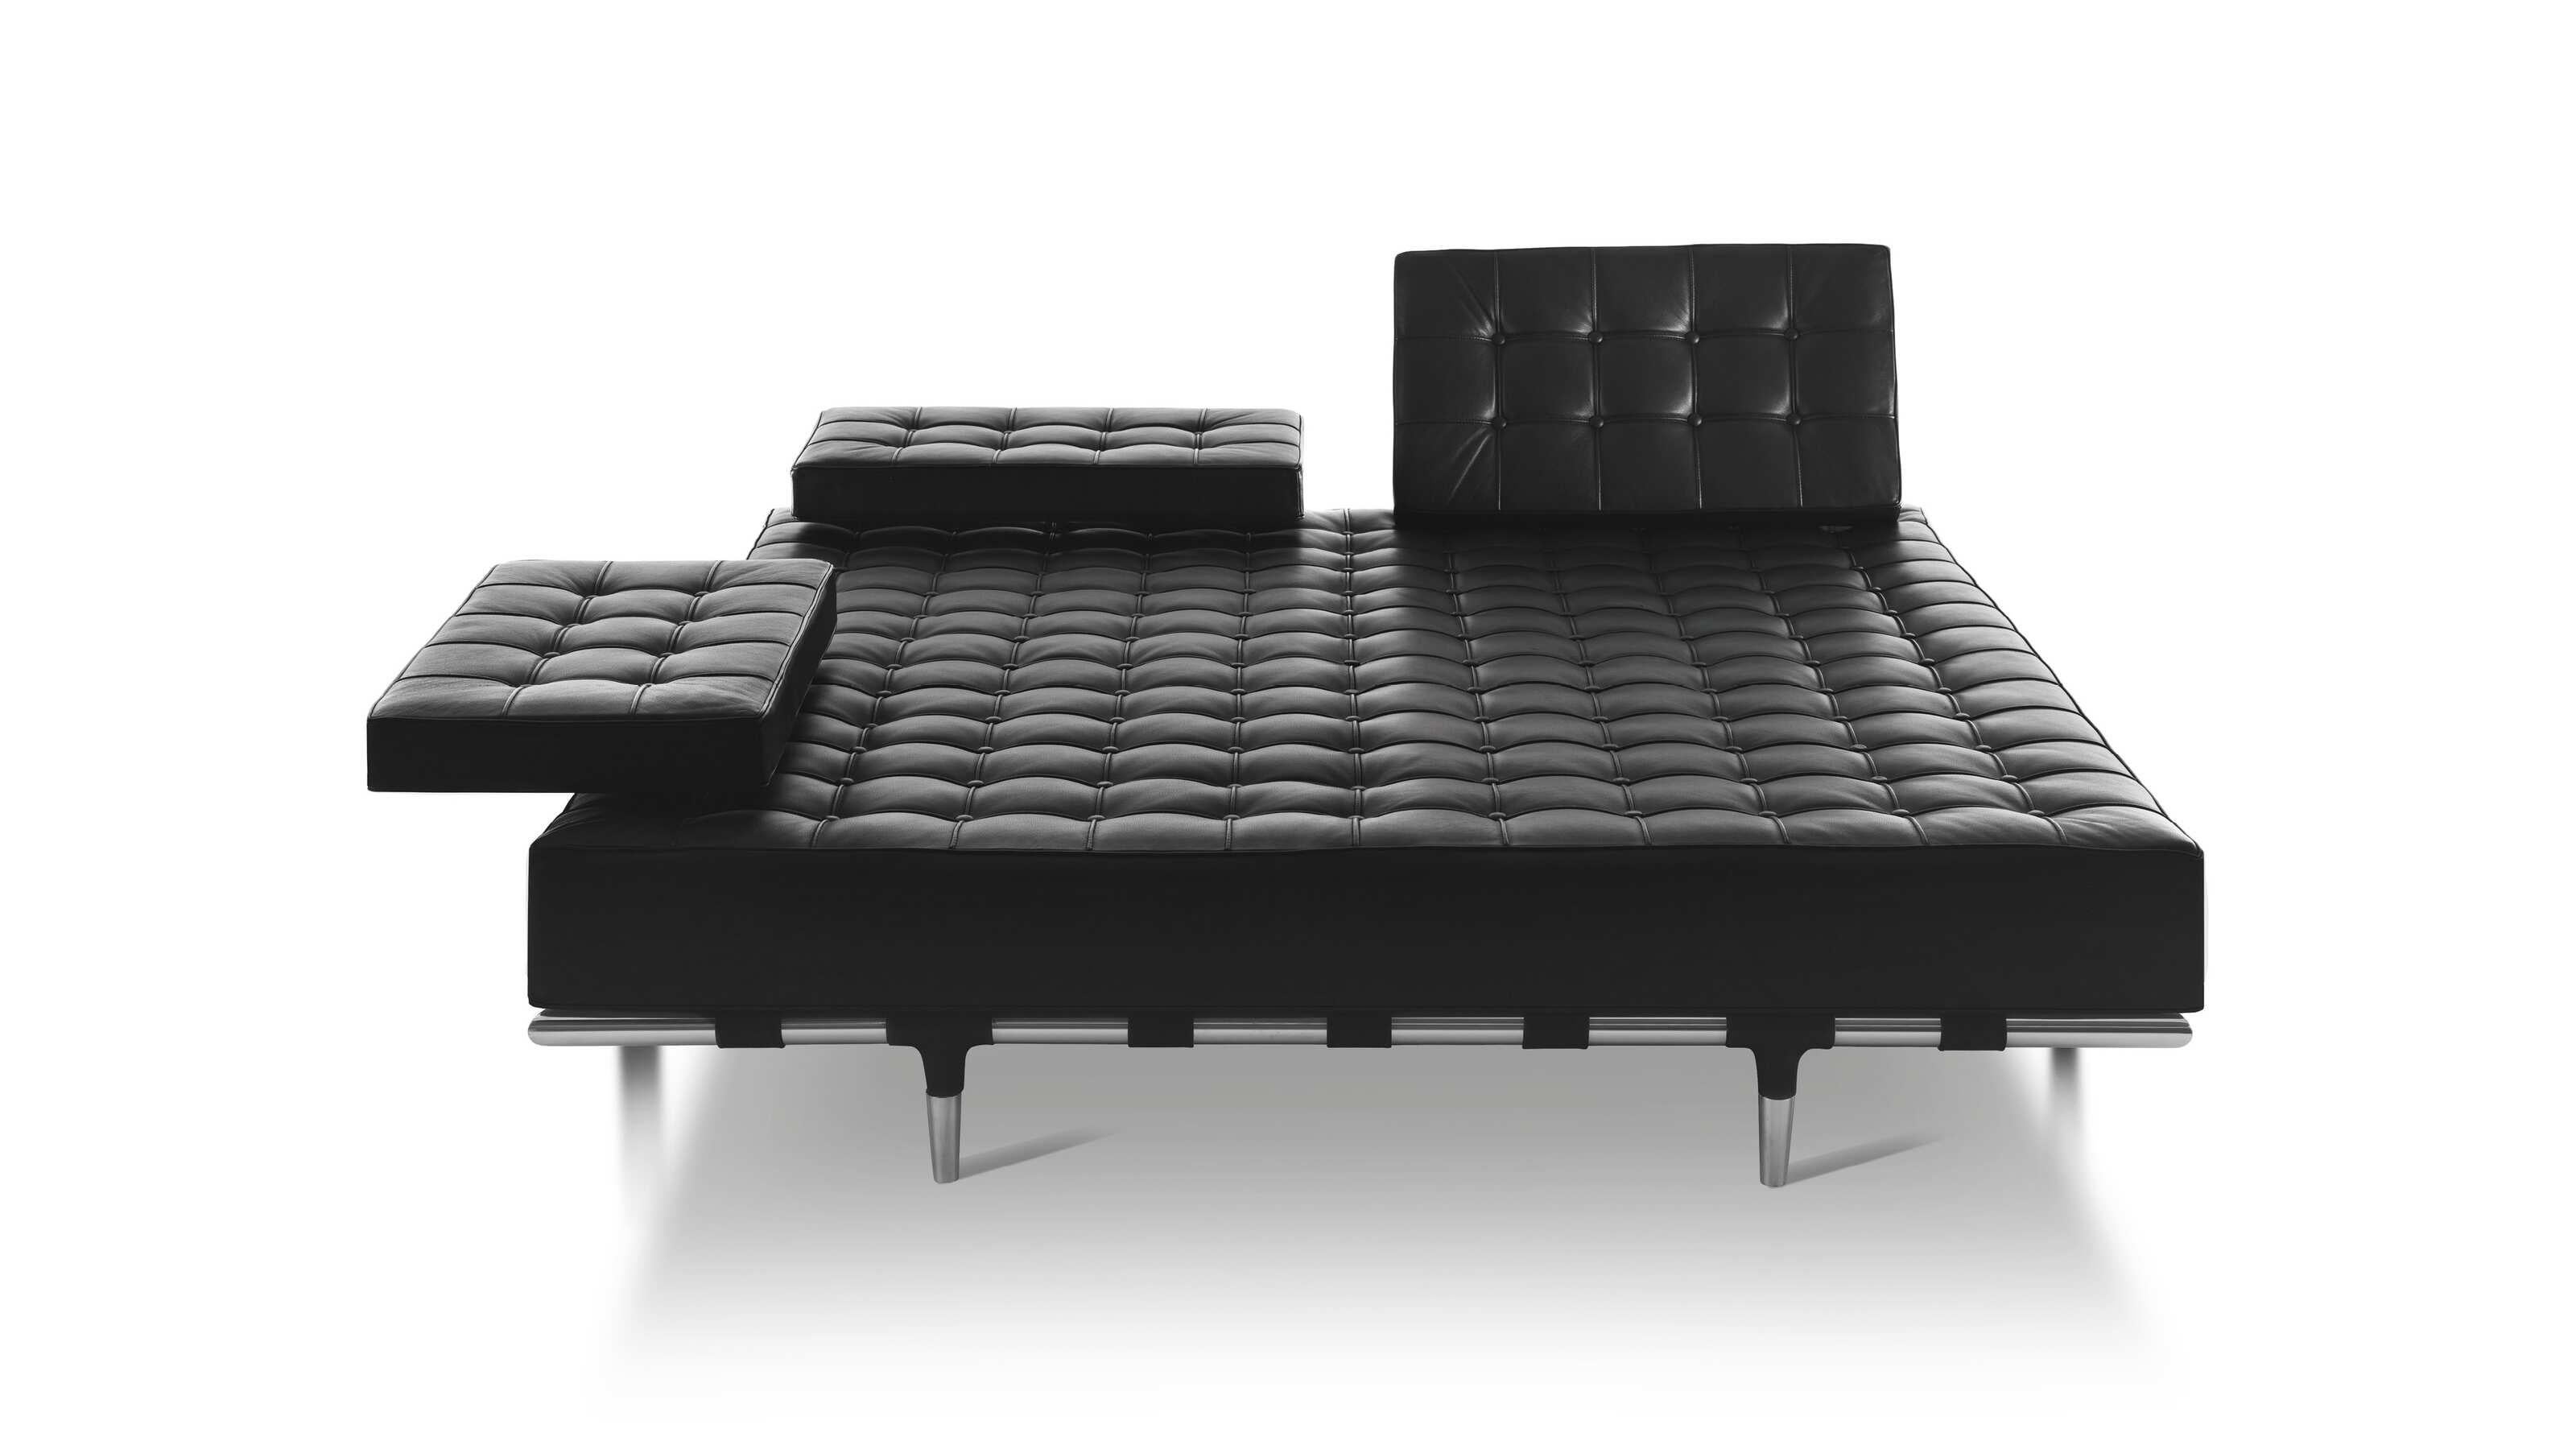 Steel And Leather Sofa model 'Prive' designed by Phillipe Stark.
Manufactured by Cassina (Italy)

Complex and formal in its design, the Privé collection perfectly combines style and transgression, merging to create an appealing mix of classicism,